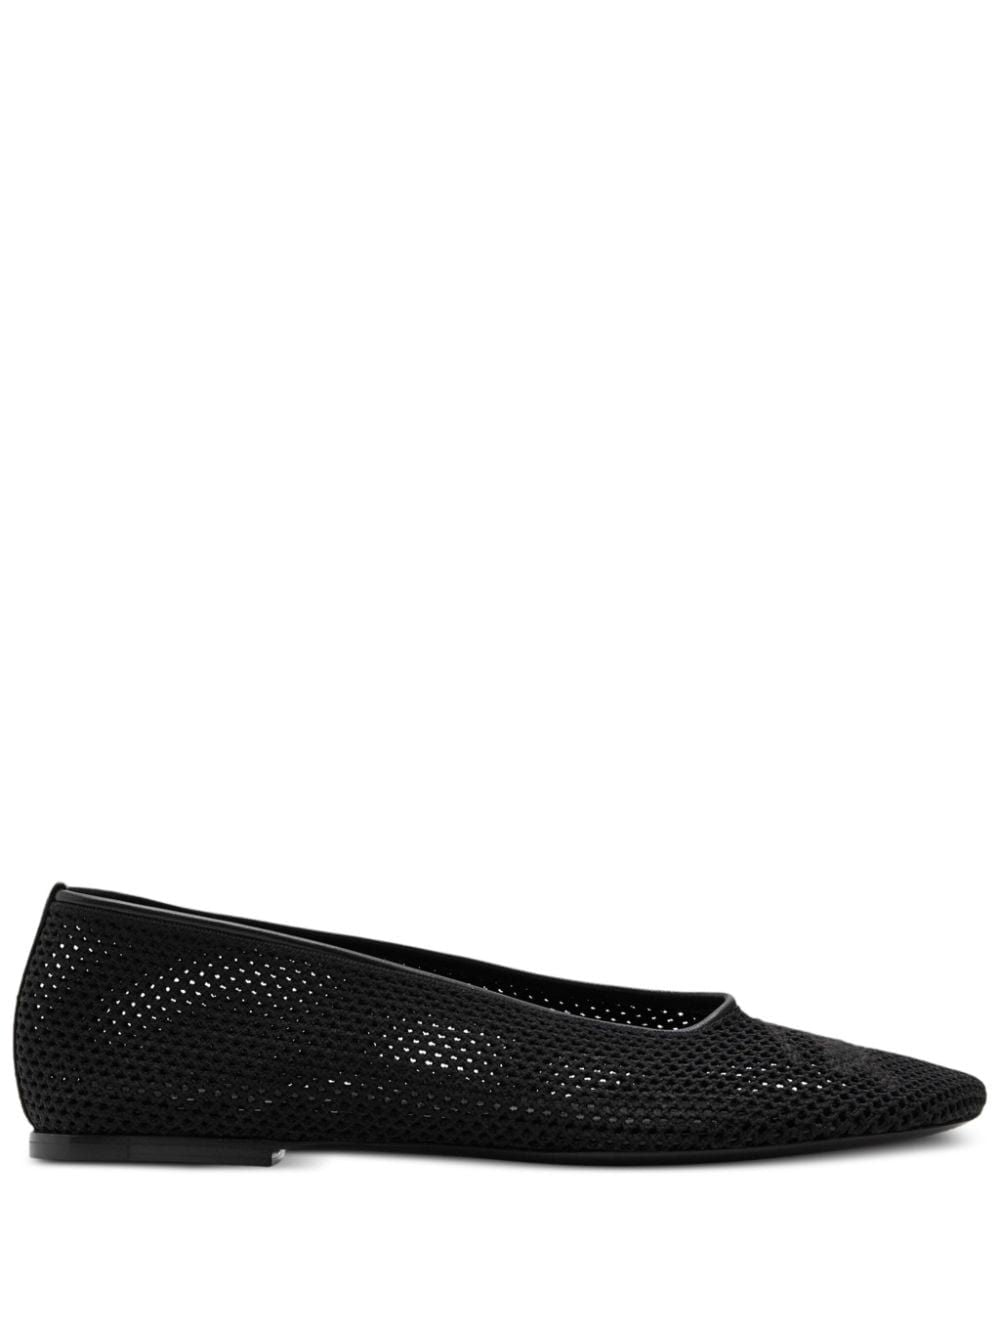 BURBERRY Elegant Black Ballerina Shoes for Women - SS24 Collection